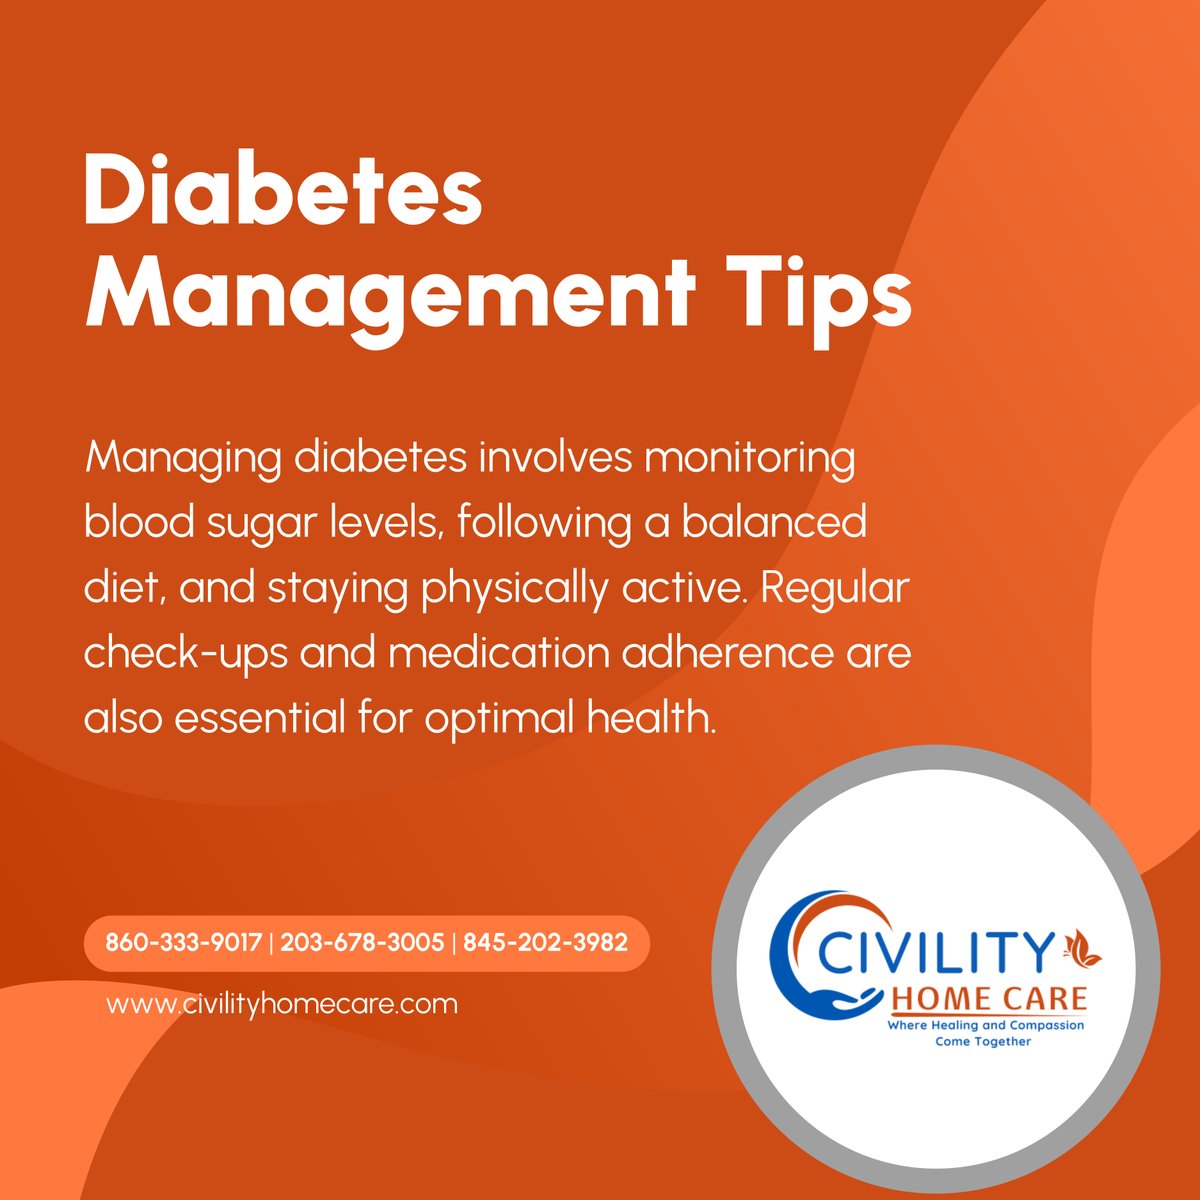 Take control of your diabetes with these management tips. Consistent self-care and medical supervision are key to living well with diabetes. 

#NewingtonCT #HomeCareAndMedicalSupplies #DiabetesCare #HealthyLiving #DiabetesManagement